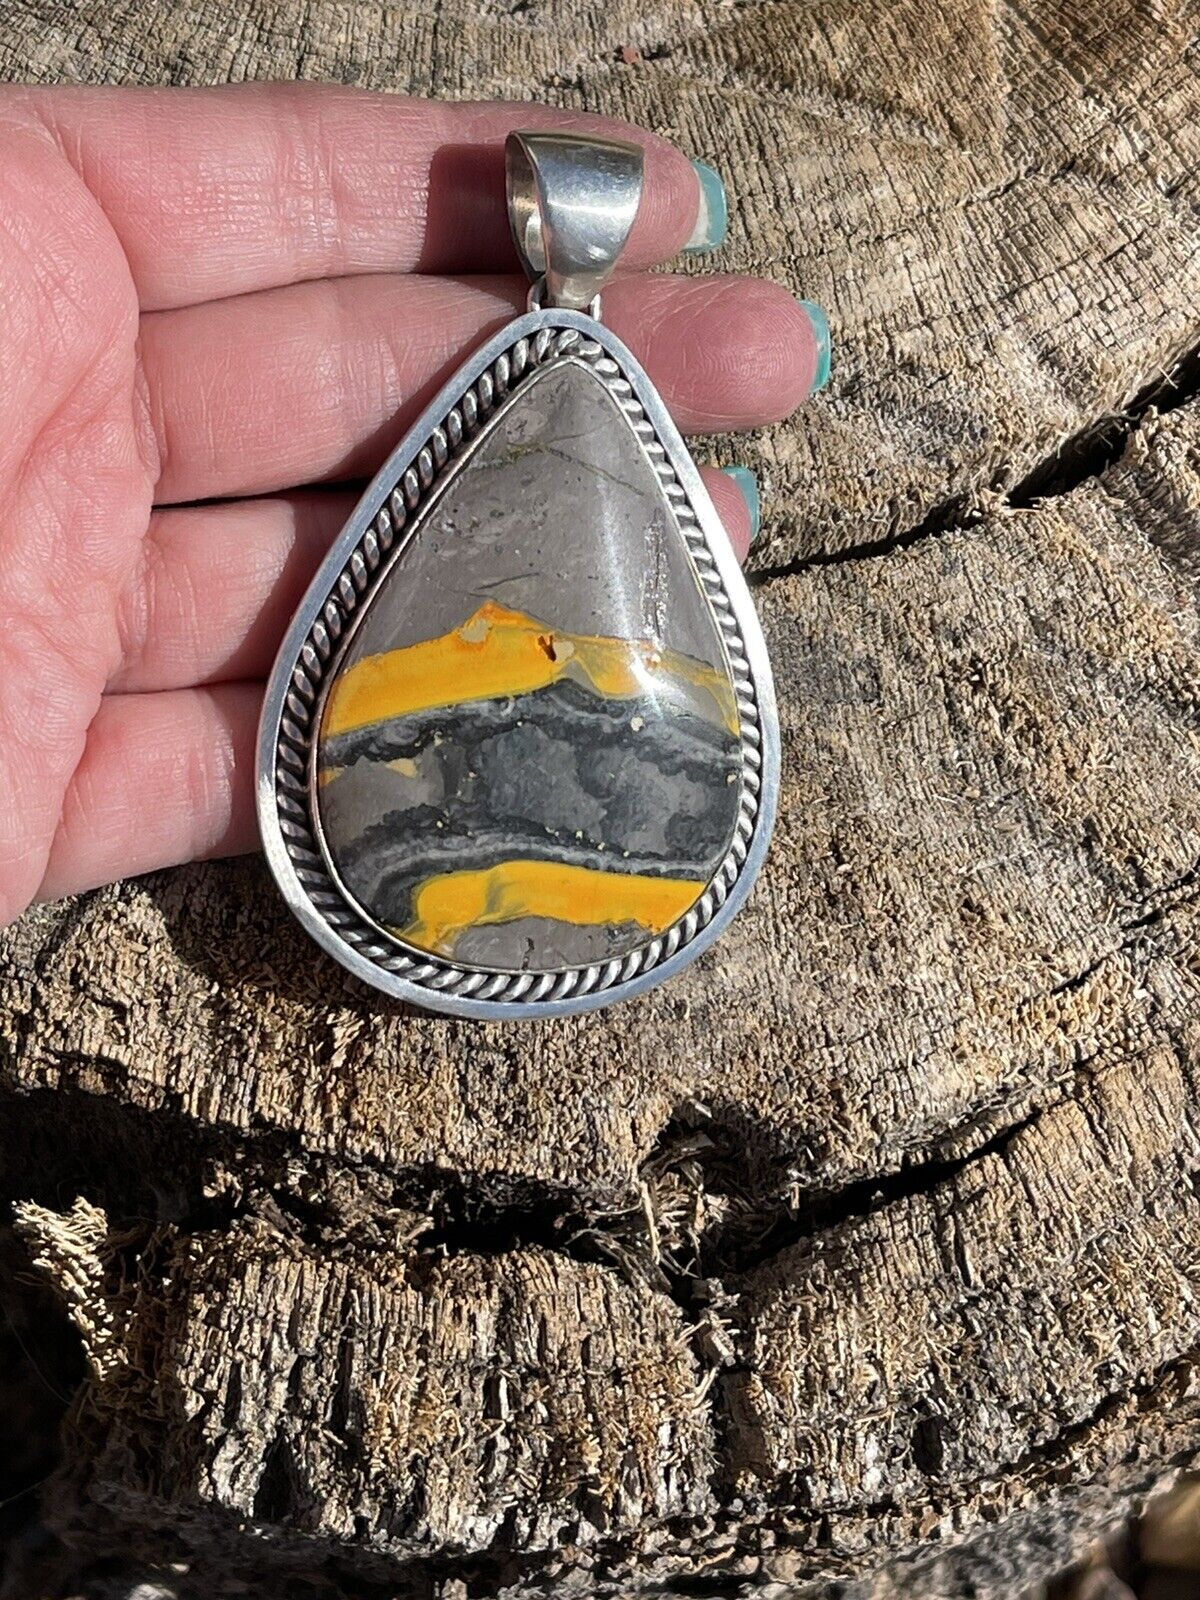 Navajo Bumble Bee Jasper & Sterling Silver Pendant Signed